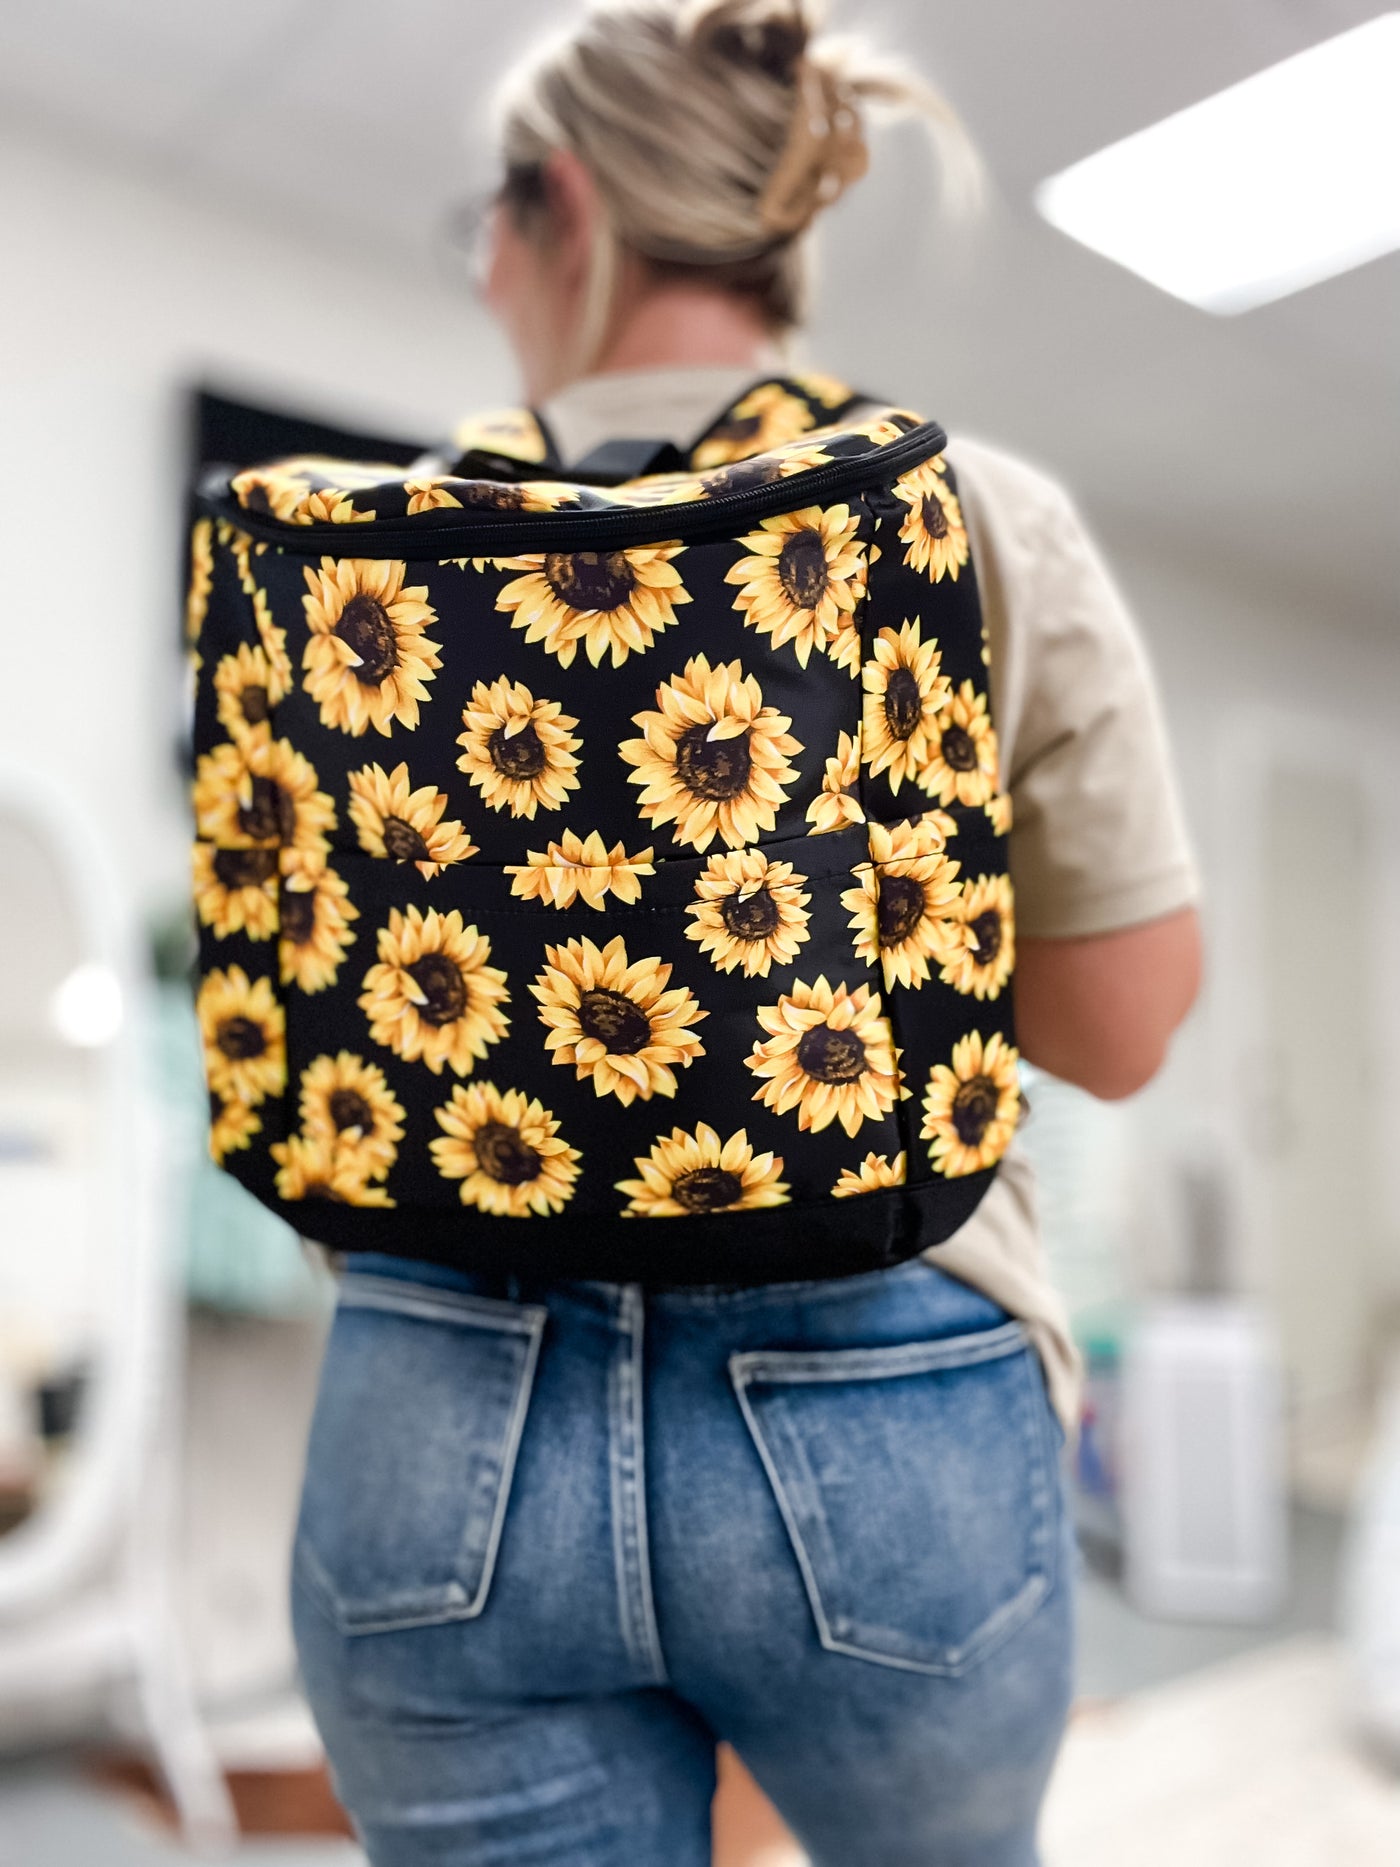 Sunflower Print Insulated Cooler Backpack